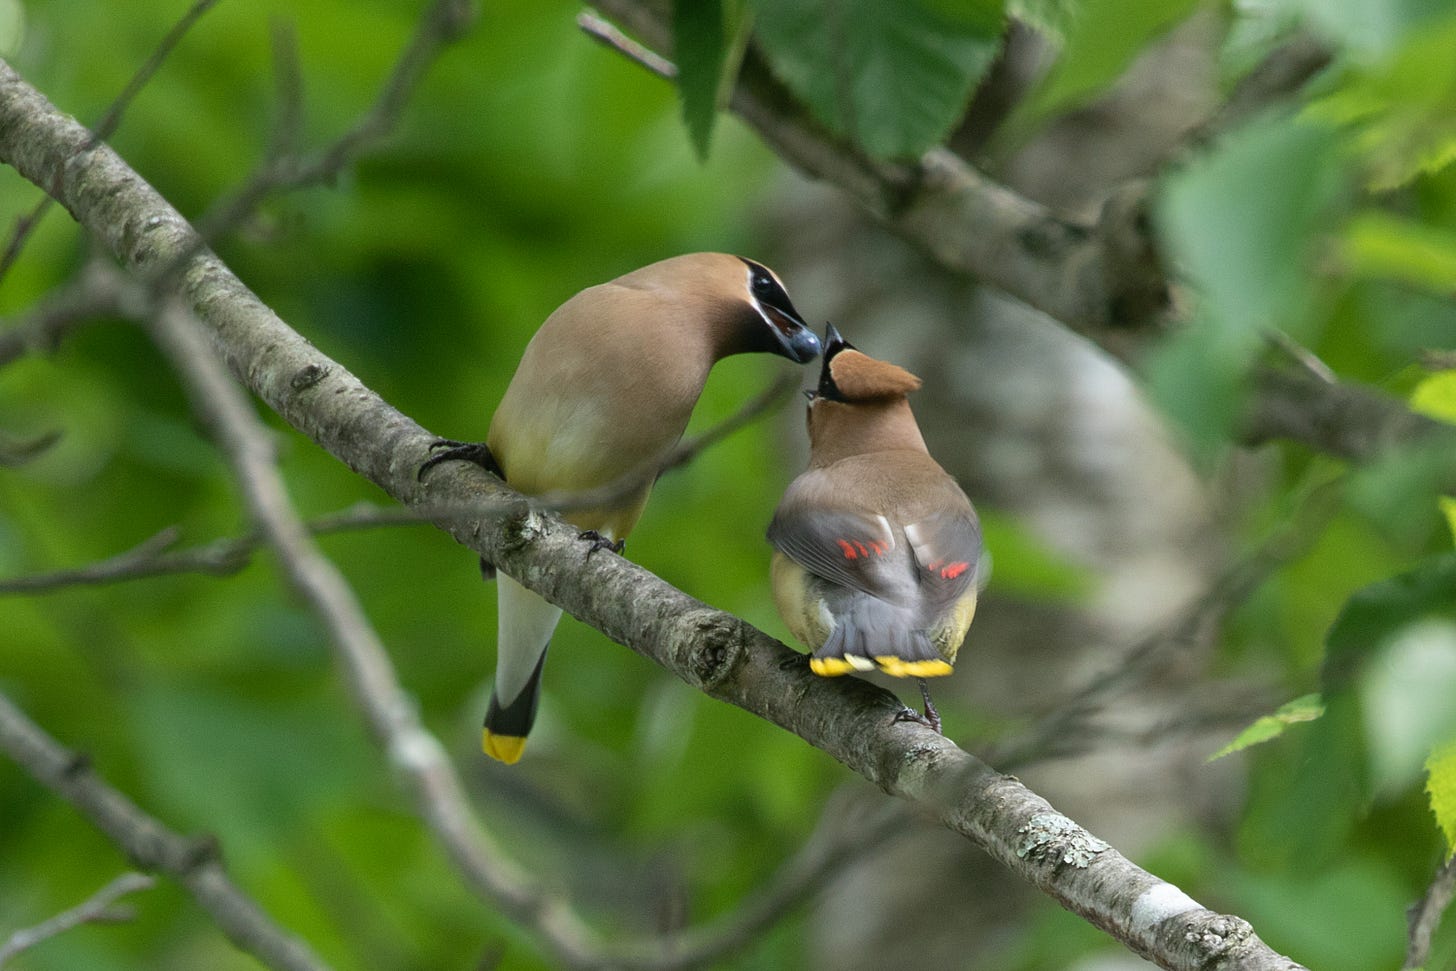 two silvery-tan birds sitting on a branch. the bird on the left is feeding a berry to the bird on the right, whose beak is wide open. both birds have black masks and yellow-tipped tails.